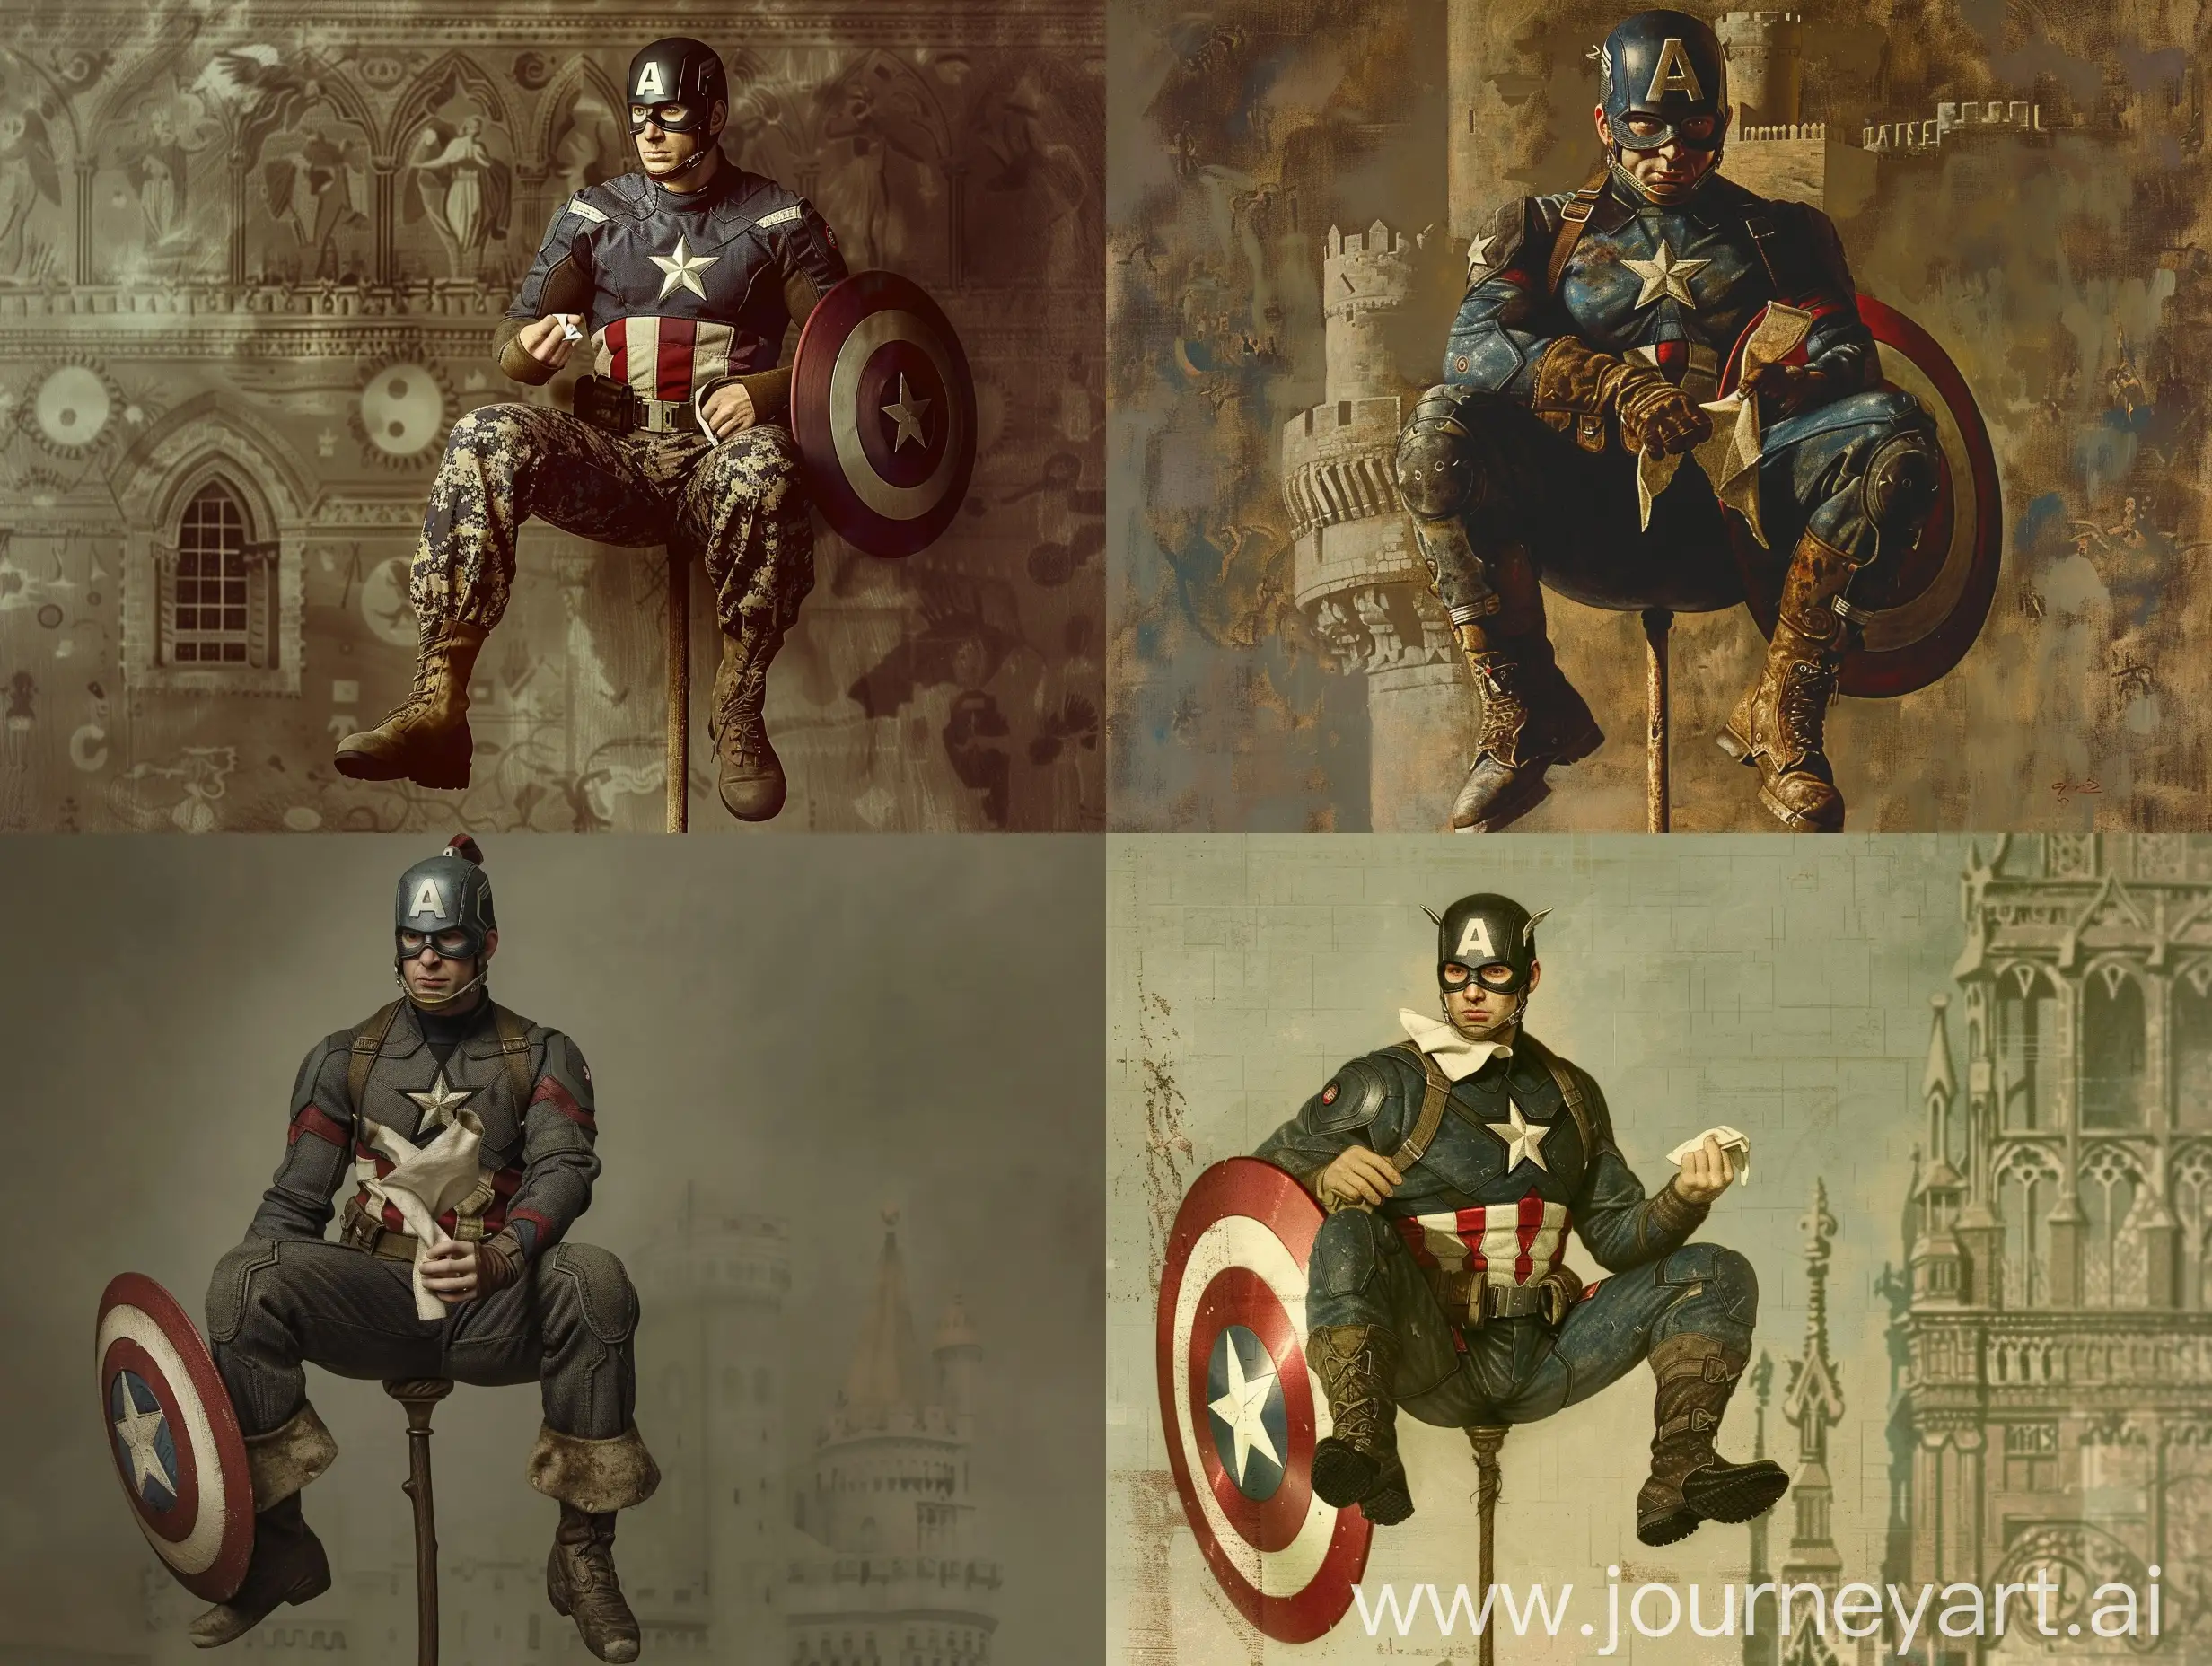 Solitary-Captain-America-in-15th-Century-Camelot-Palace